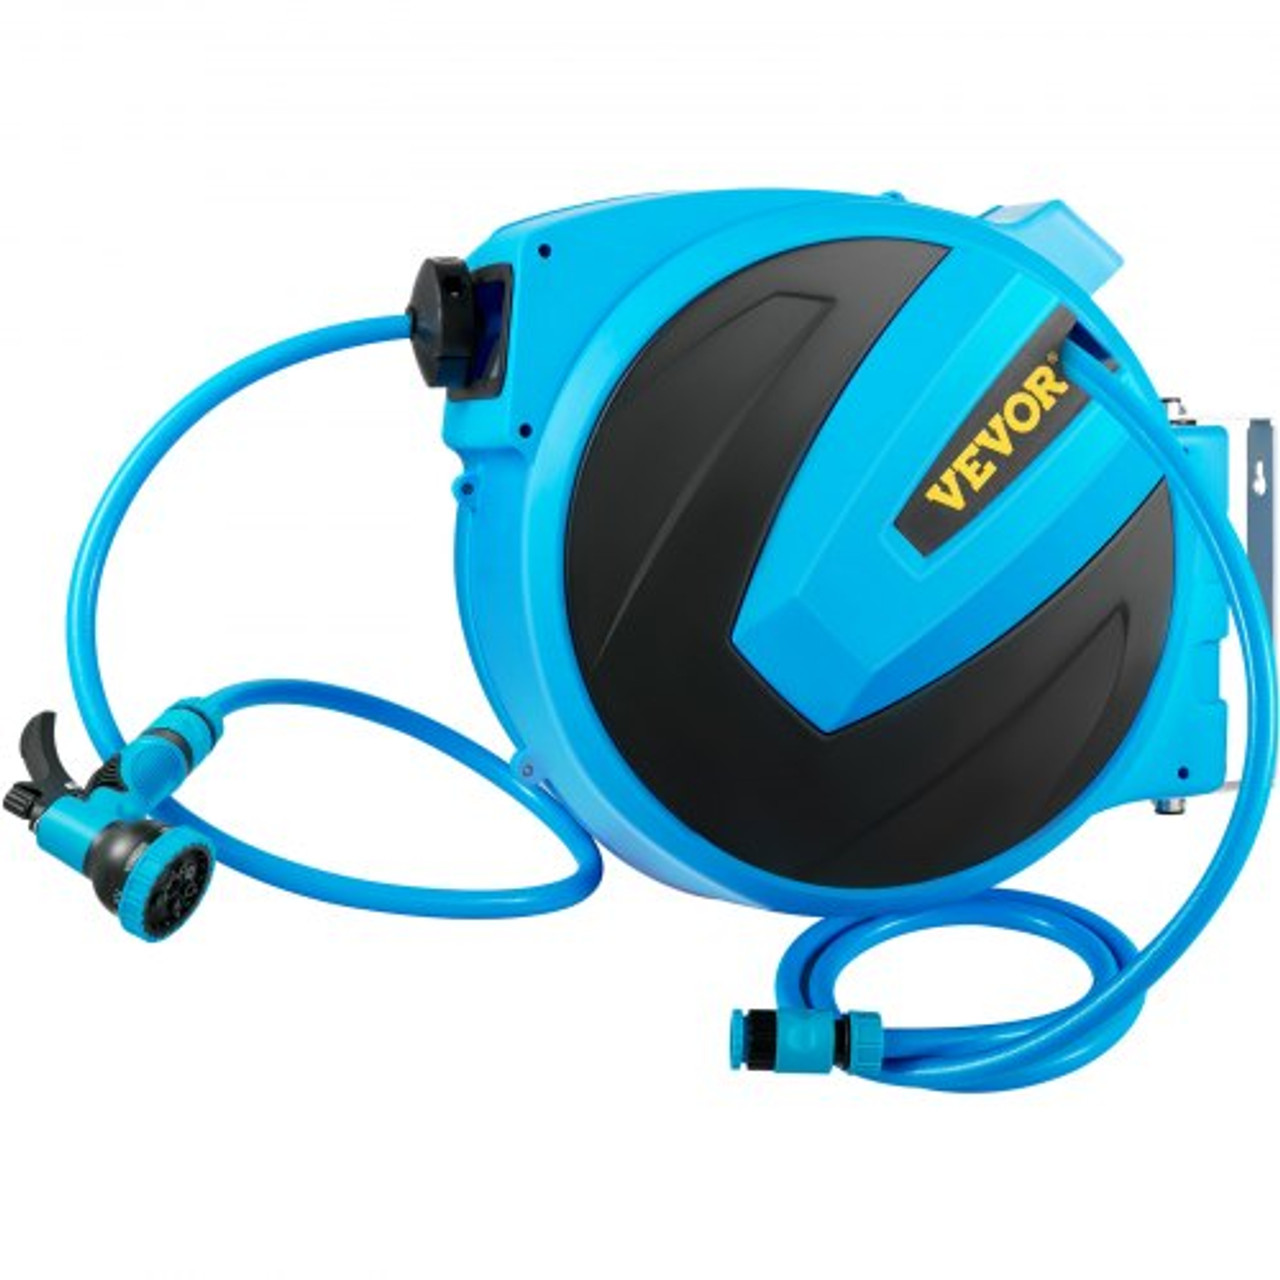 Retractable Hose Reel, 1/2 inch x 85 ft, Any Length Lock & Automatic Rewind  Water